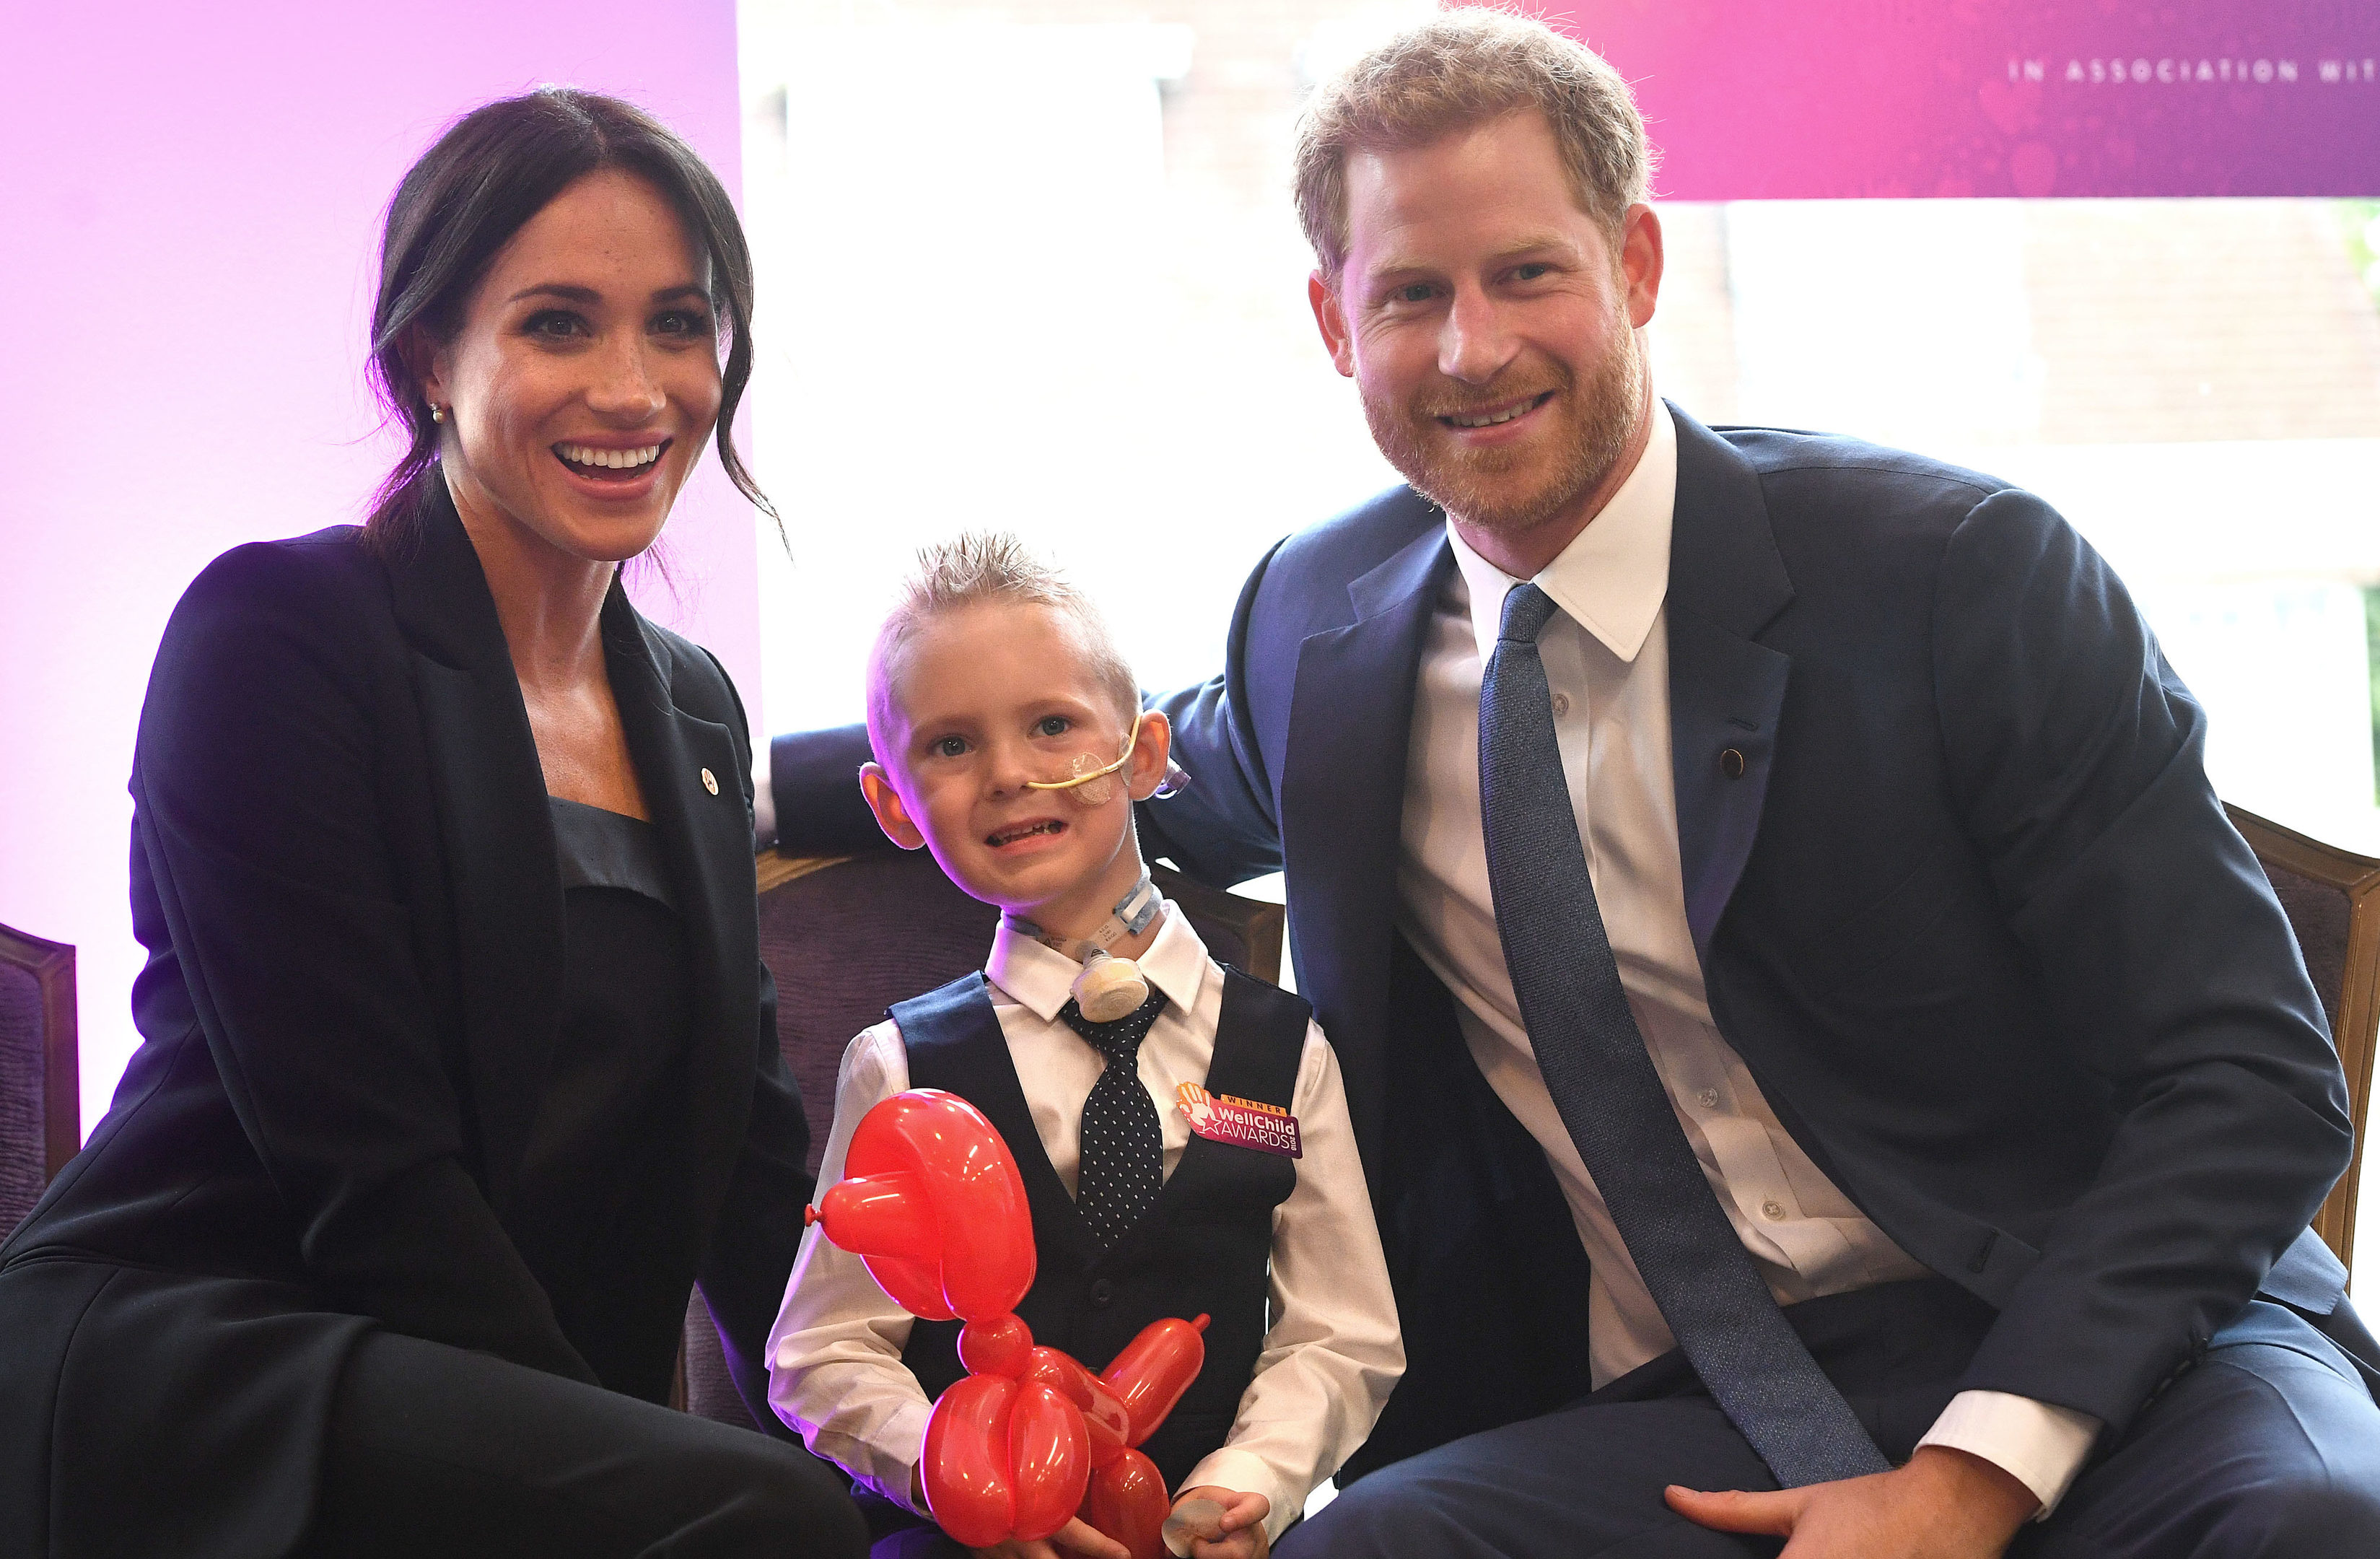 Prince Harry, Duke of Sussex and Meghan, Duchess of Sussex meet four-year-old Mckenzie Brackley during the annual WellChild awards at Royal Lancaster Hotel on September 4, 2018.